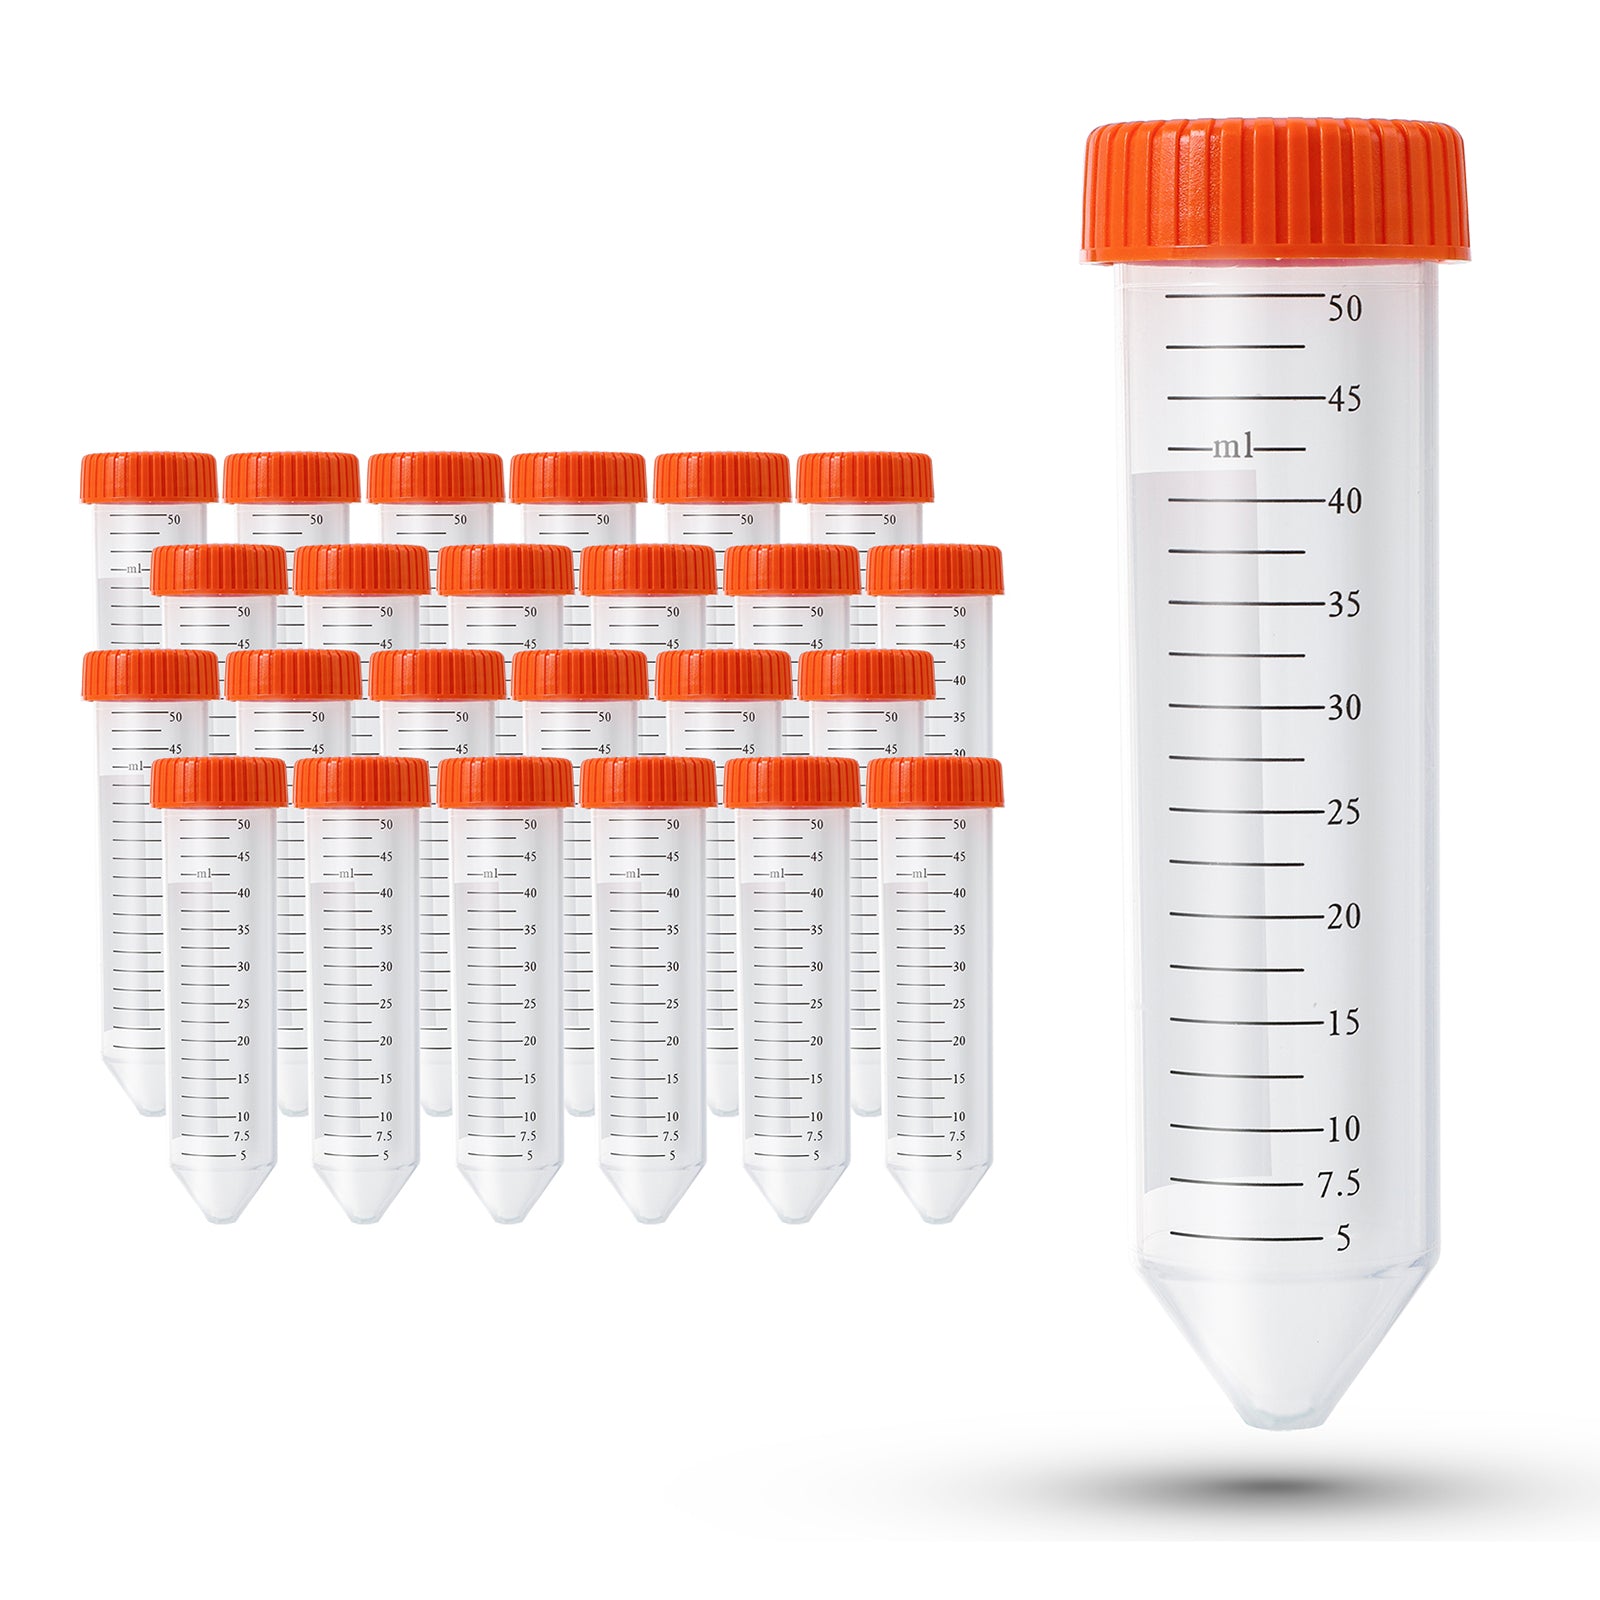 Centrifuge Tubes in Styrofoam Plates, Conical Bottom, Available in 15 ml  and 50 ml